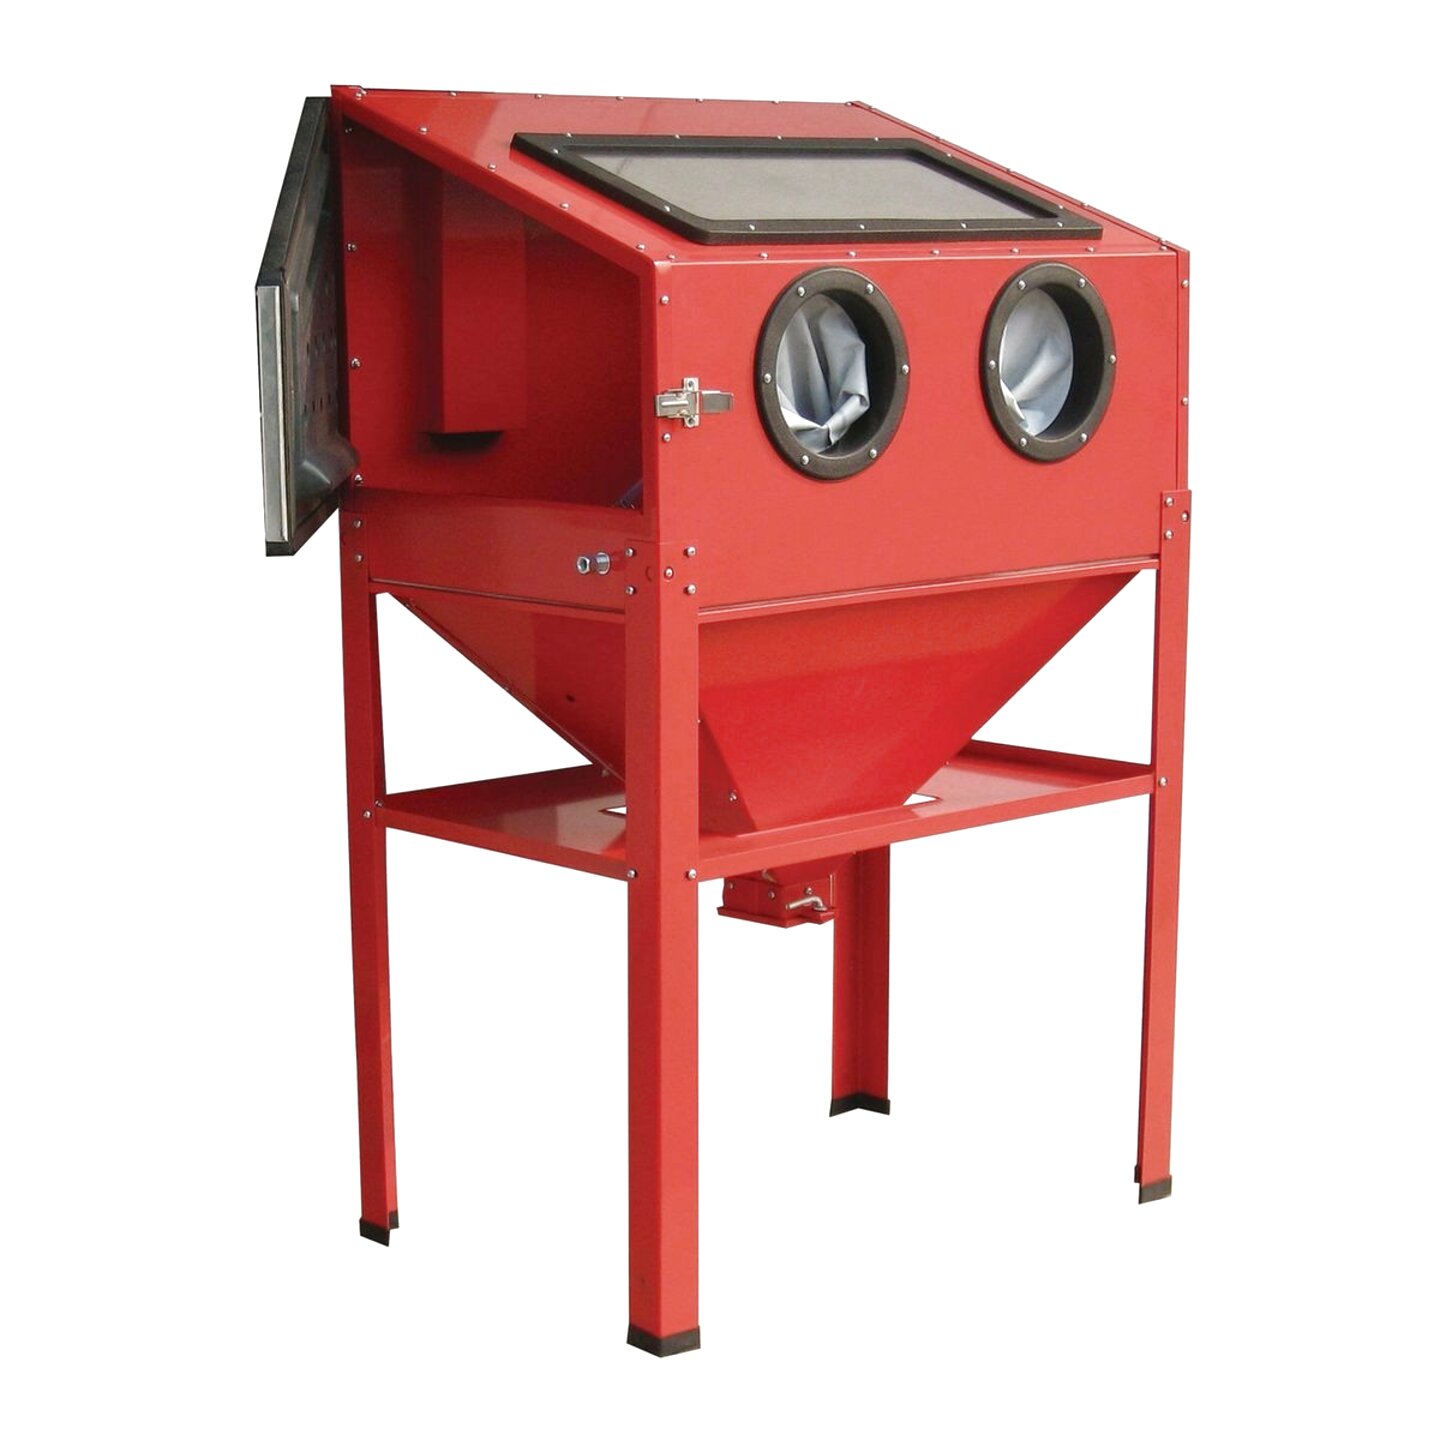 Sand Blasting Cabinet for sale in UK | 58 used Sand Blasting Cabinets